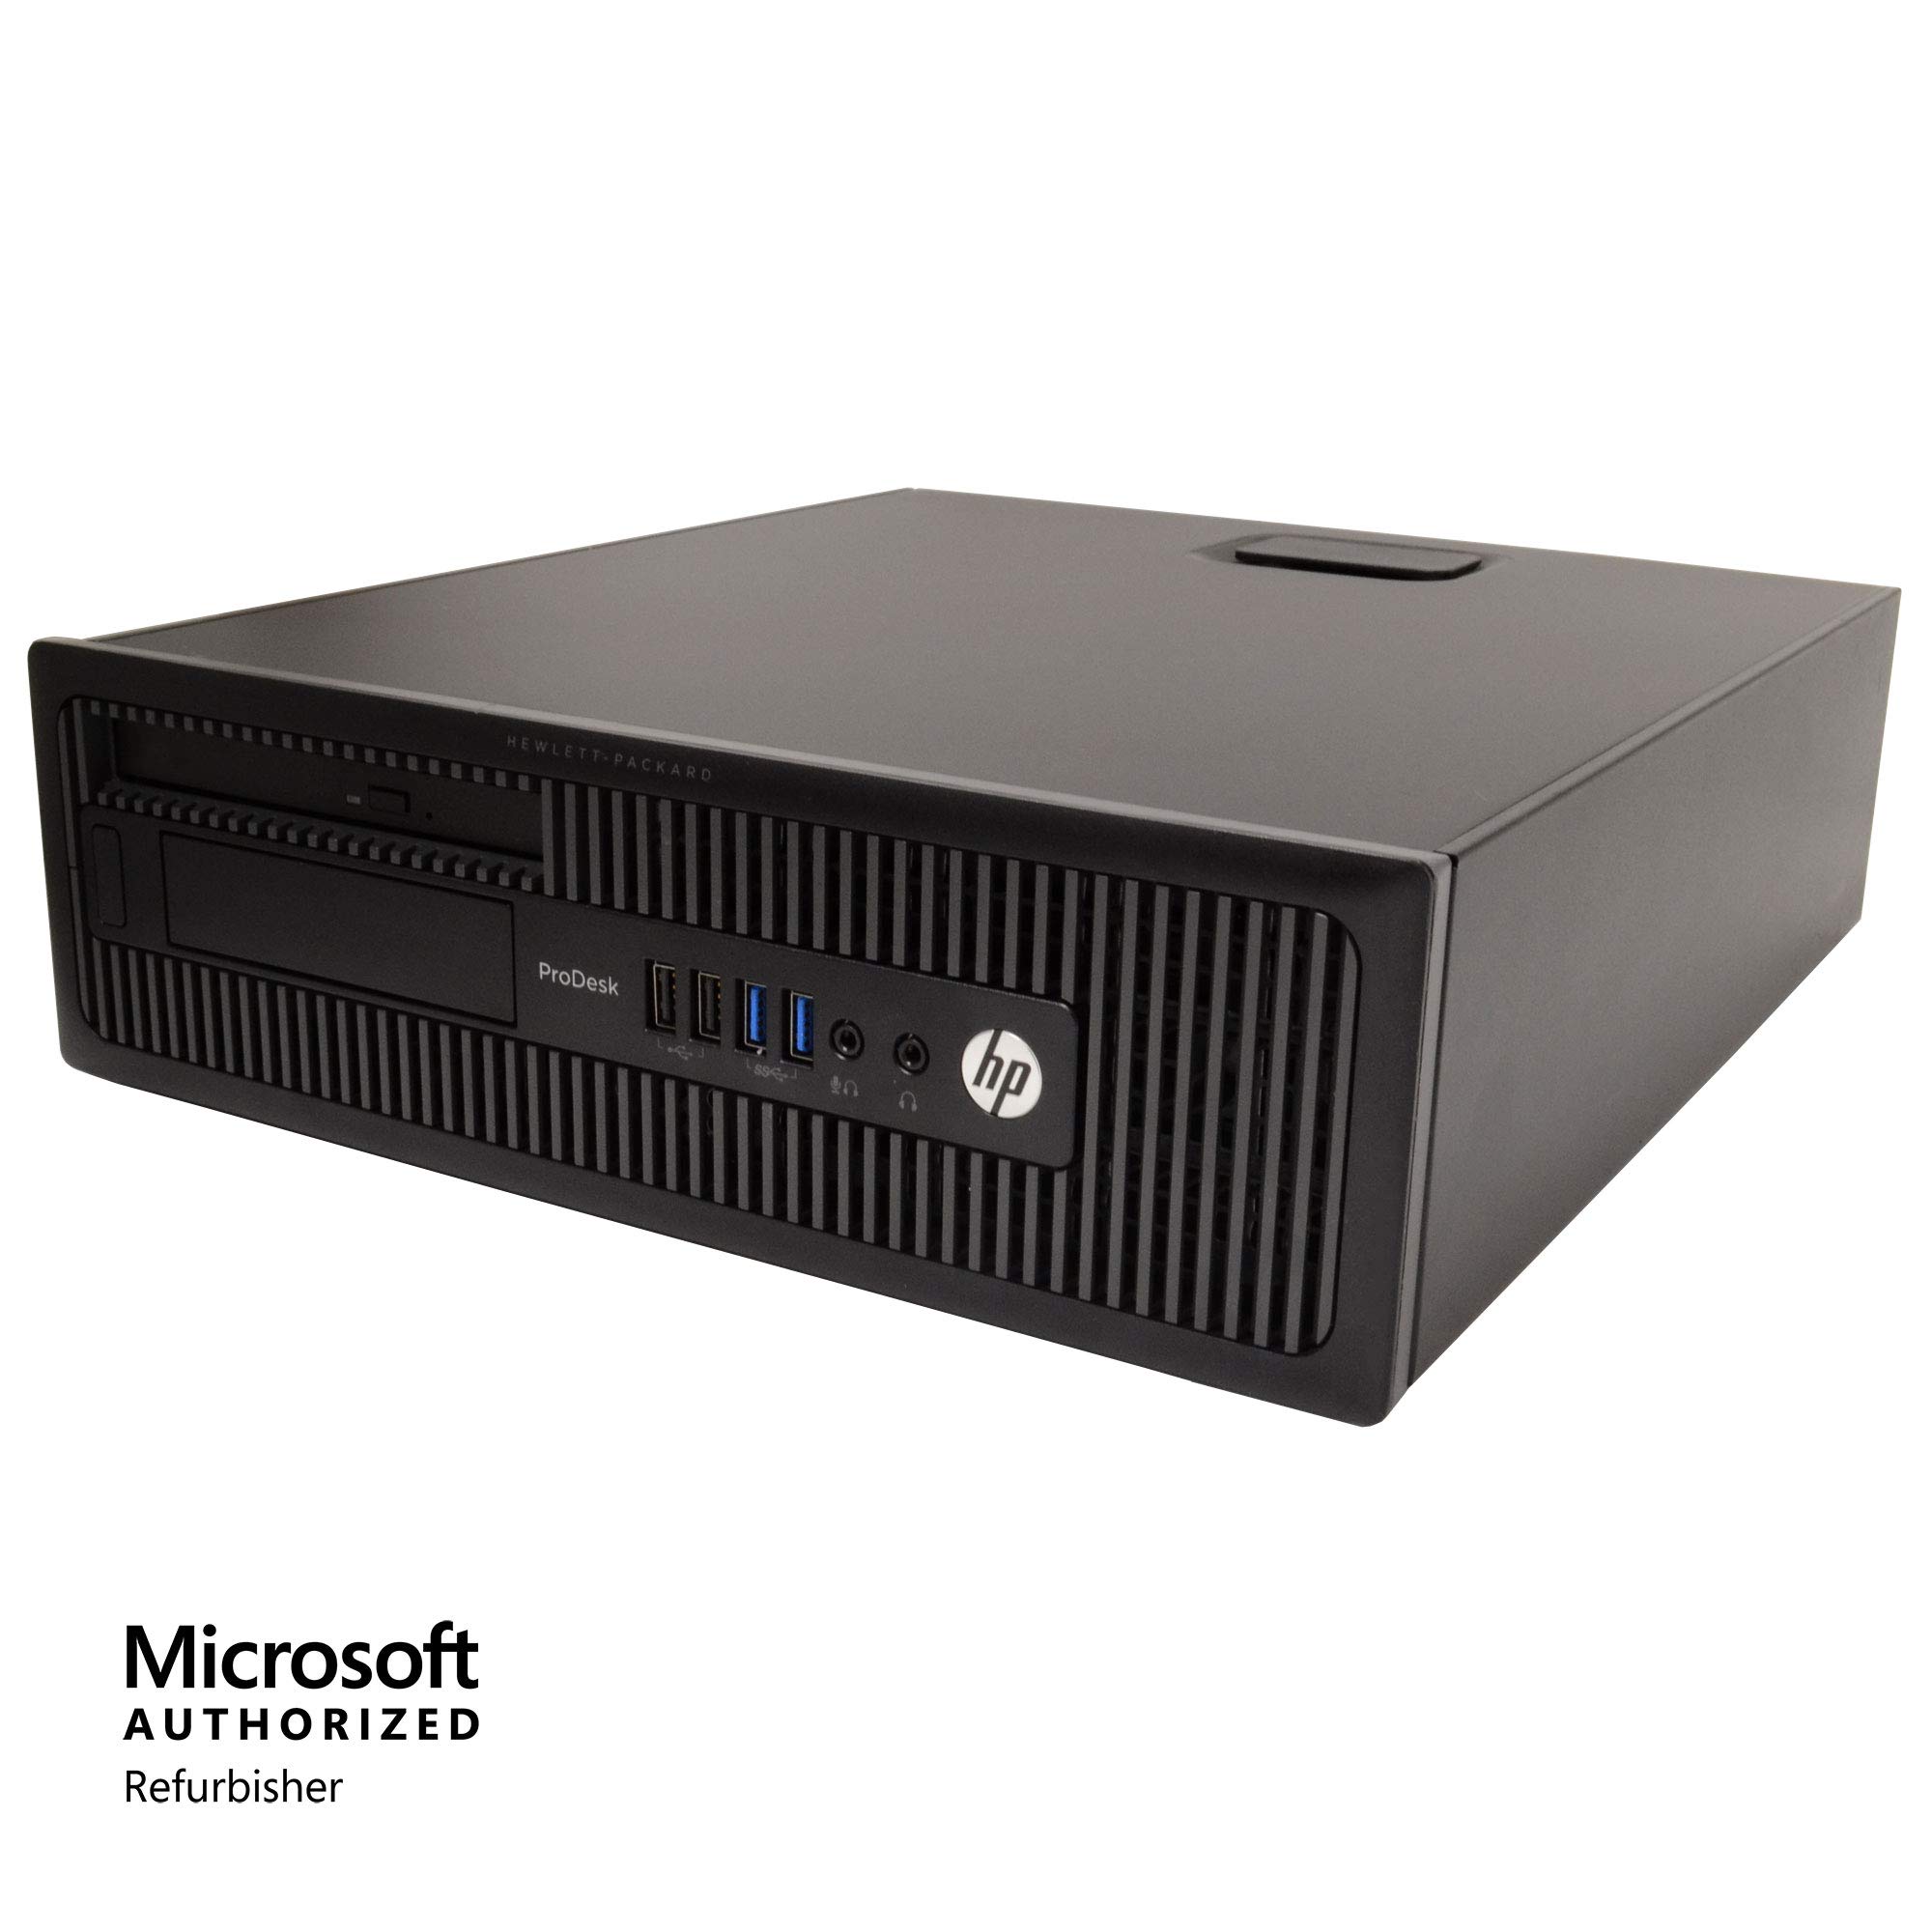 HP ProDesk 4th Generation Desktop Computer | Quad Core Intel i5 (3.2) | 32GB DDR3 RAM | 1TB SSD Solid State | Windows 10 Professional | Home or Office PC (Renewed)